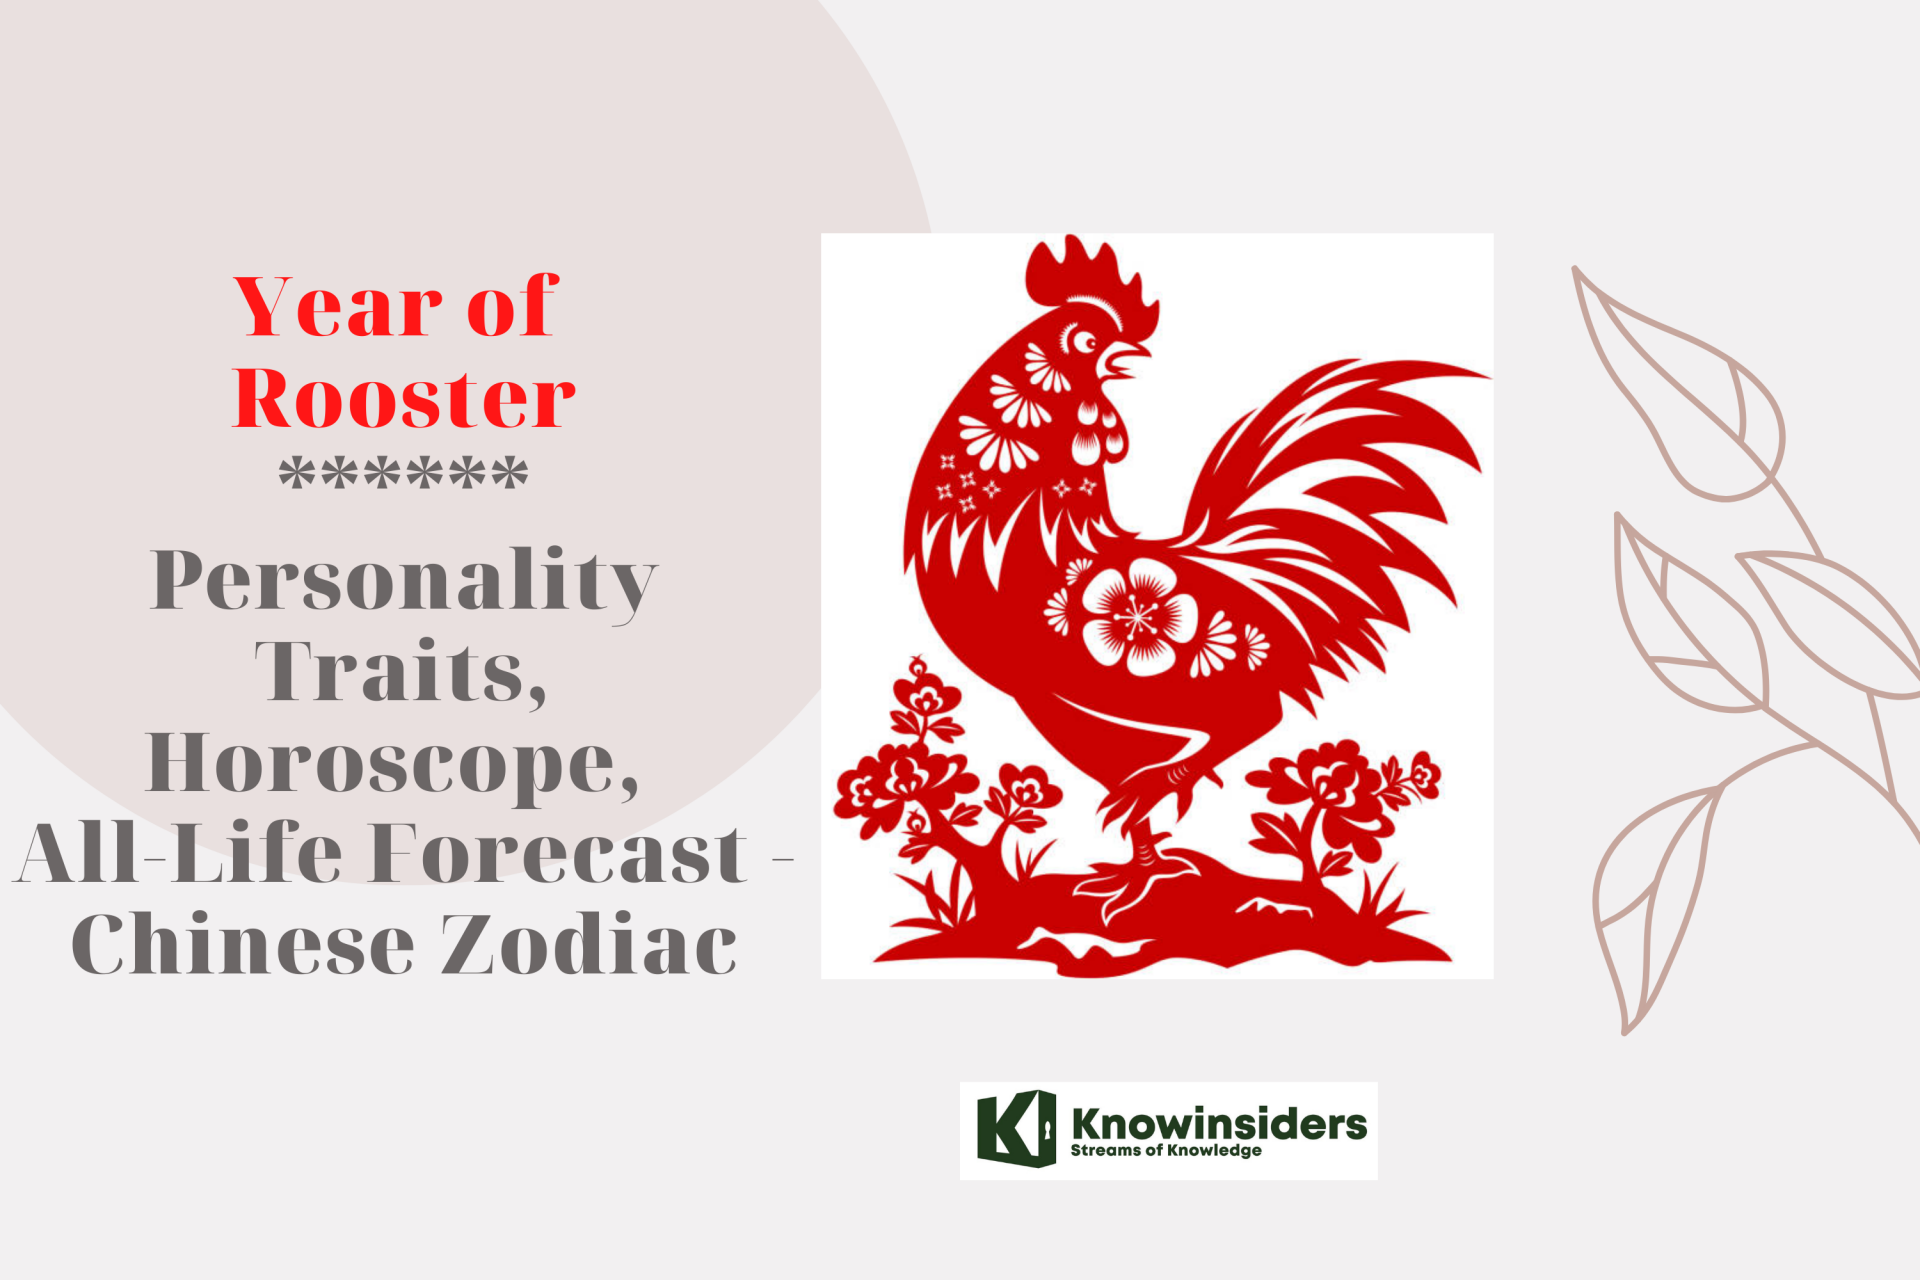 Year of the Rooster: Personality Traits, Horoscope, Forecast - Chinese Zodiac